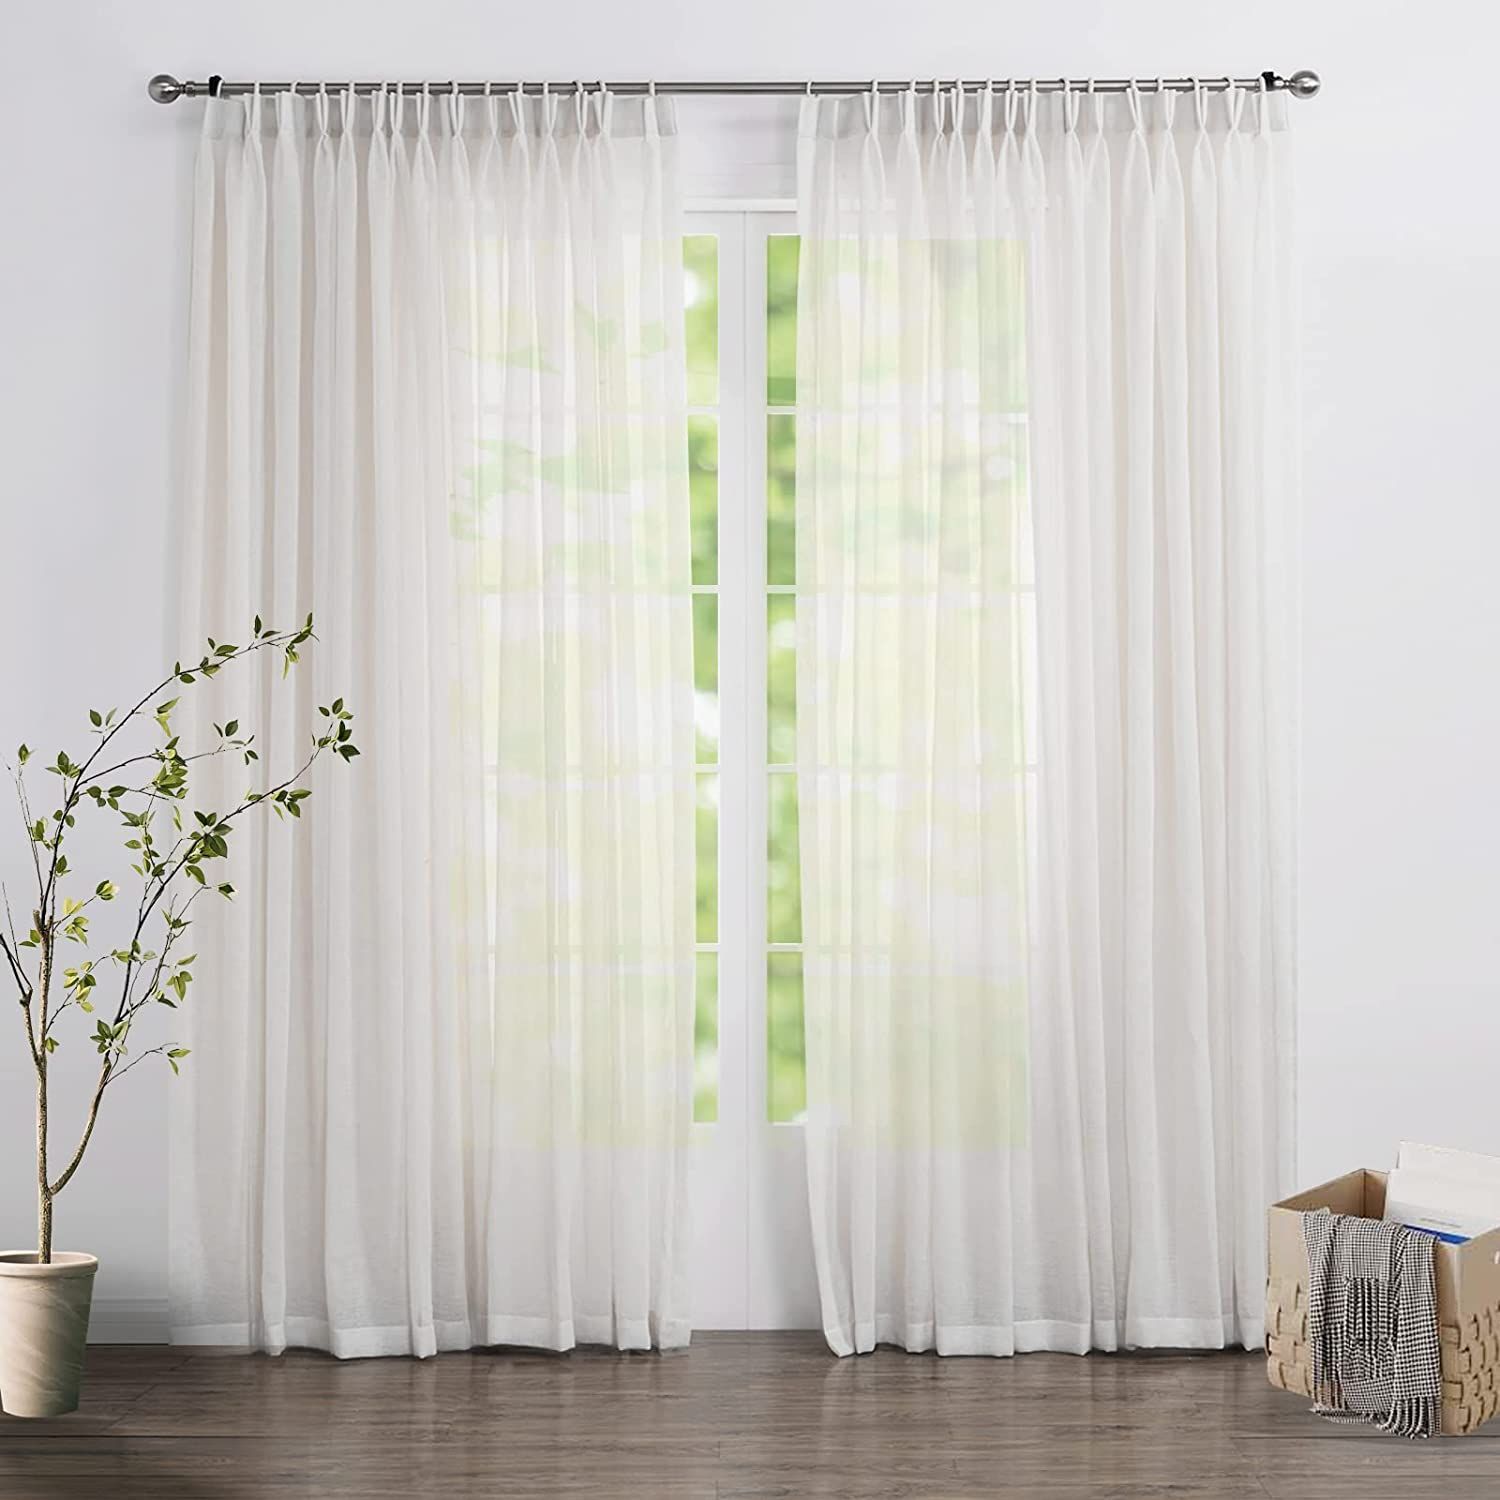 LANTIME White Semi Sheer Curtains, Faux Linen Double Pleated Extra Long Window Sheer Curtains Pan... | Amazon (US)